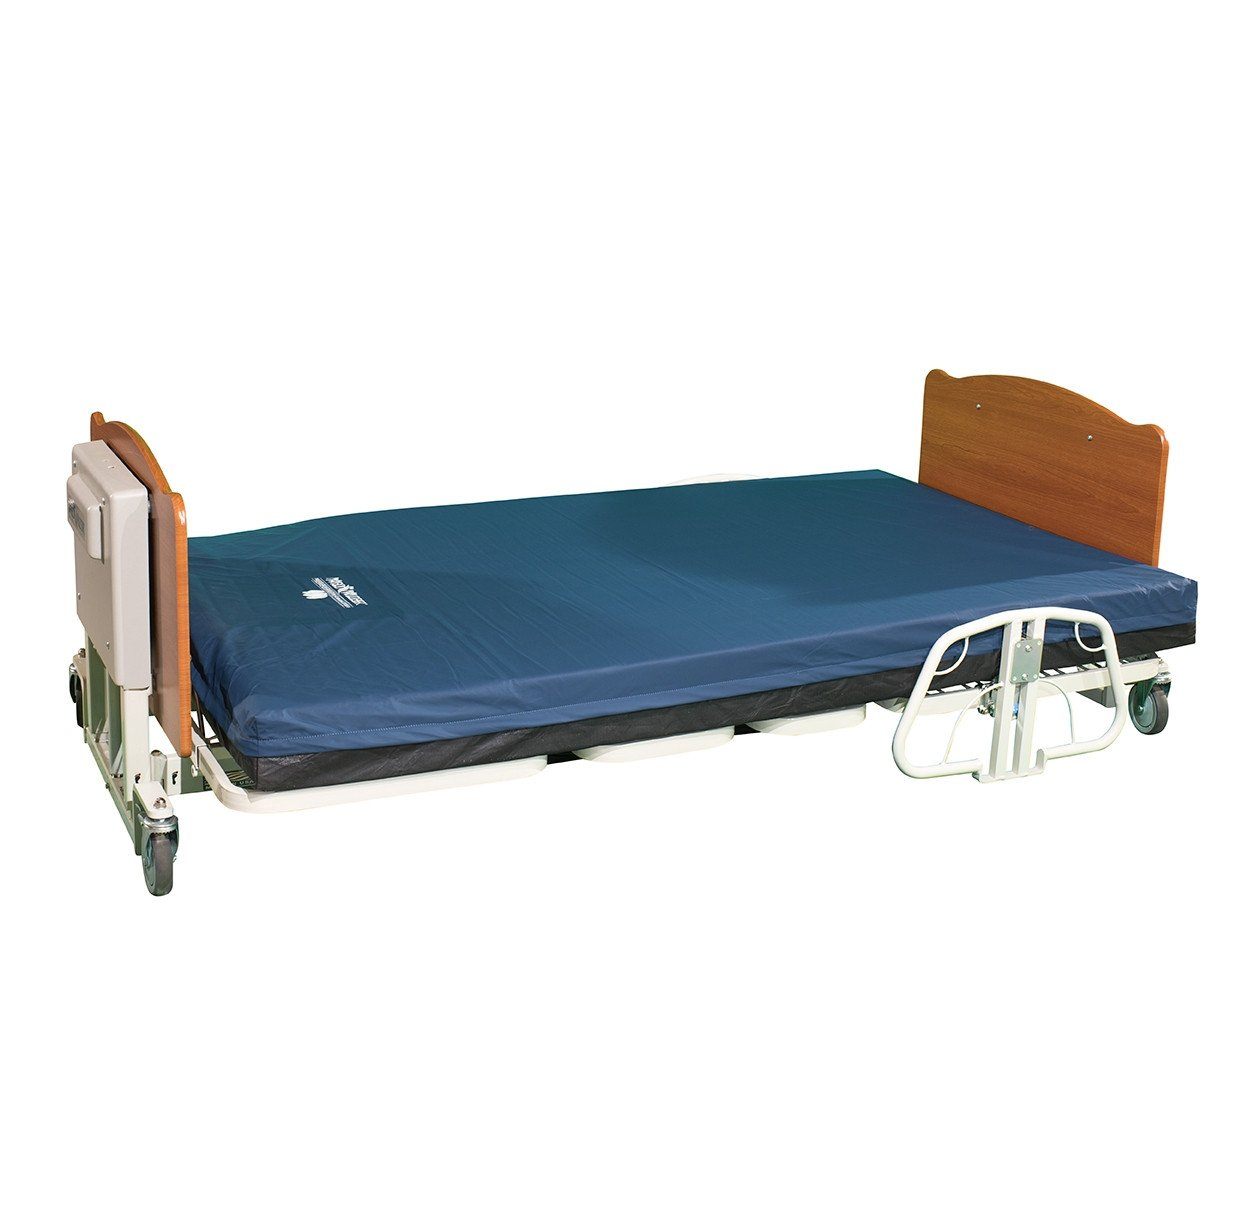 Bariatric Comfort Wide Bed- Expandable from 36" 42" 48"- 800lb Weight Limit" - Wound Care Mattress